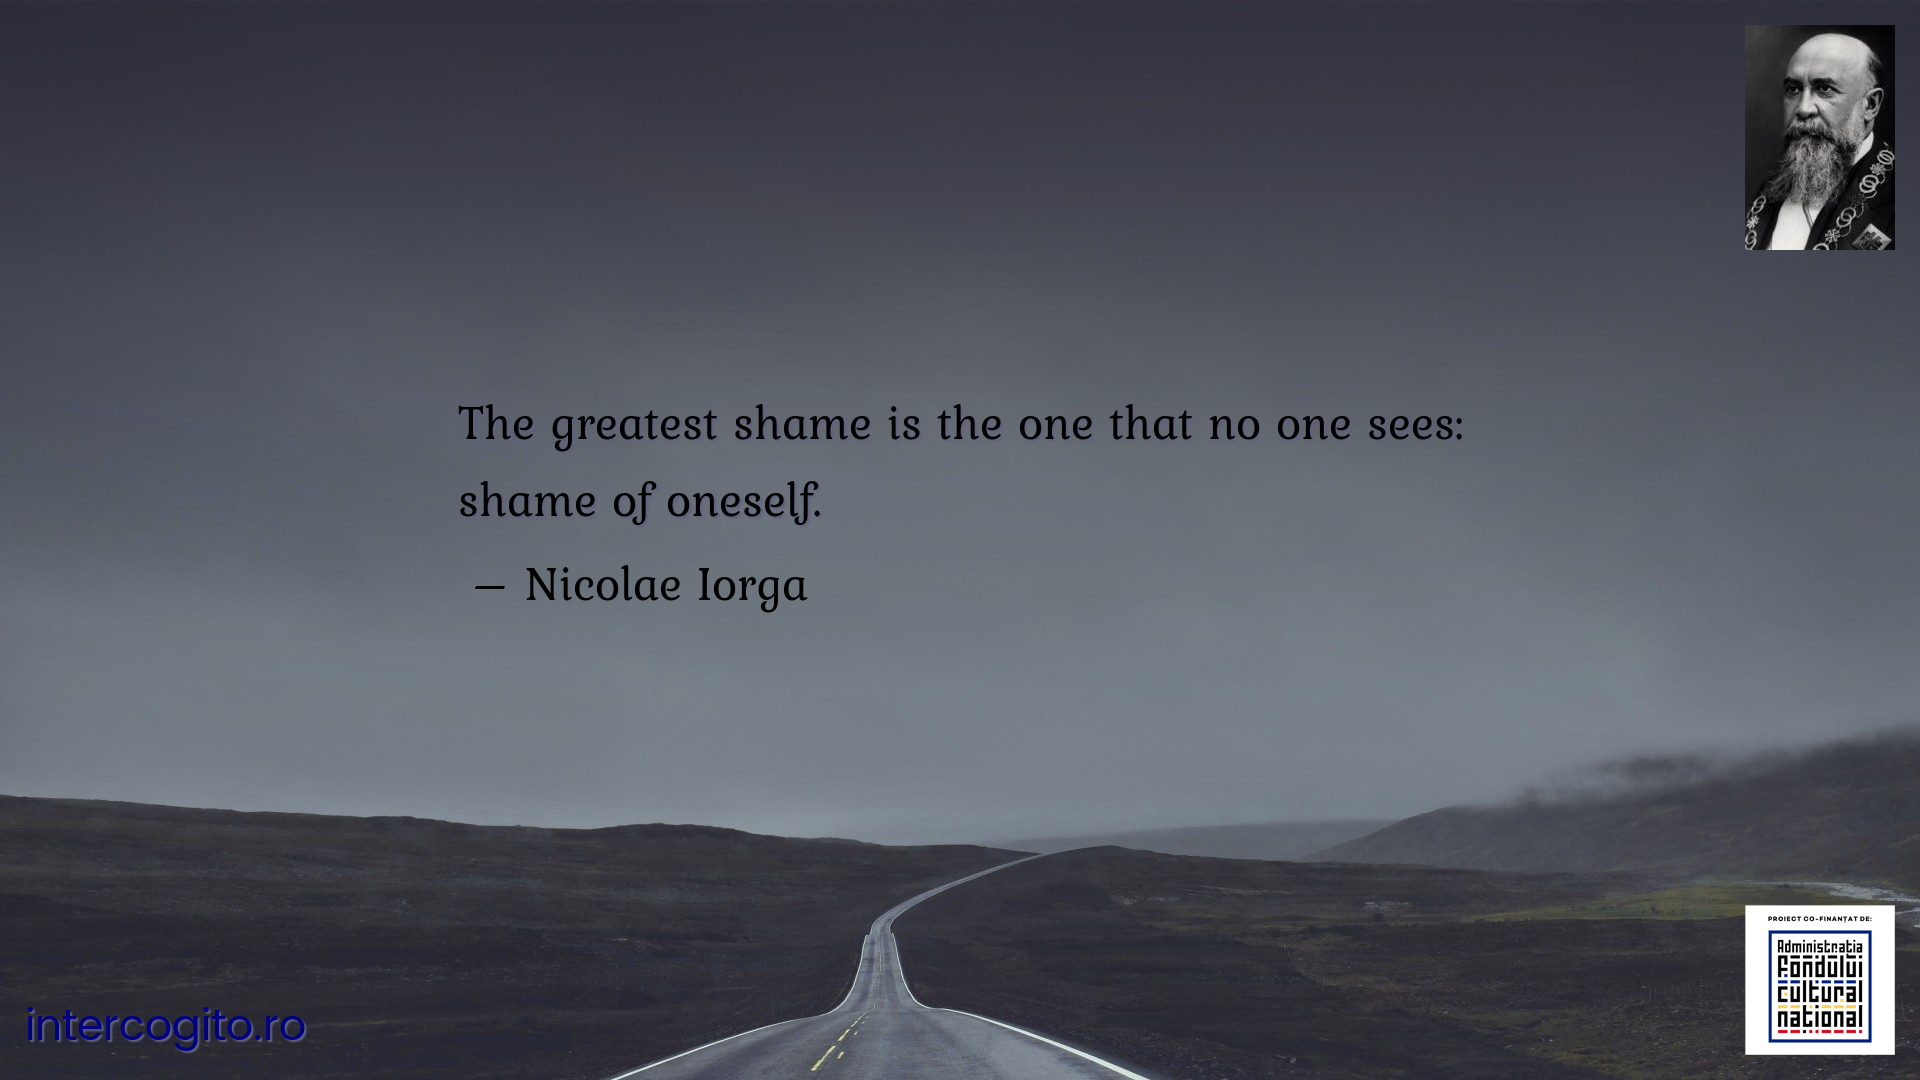 The greatest shame is the one that no one sees: shame of oneself.